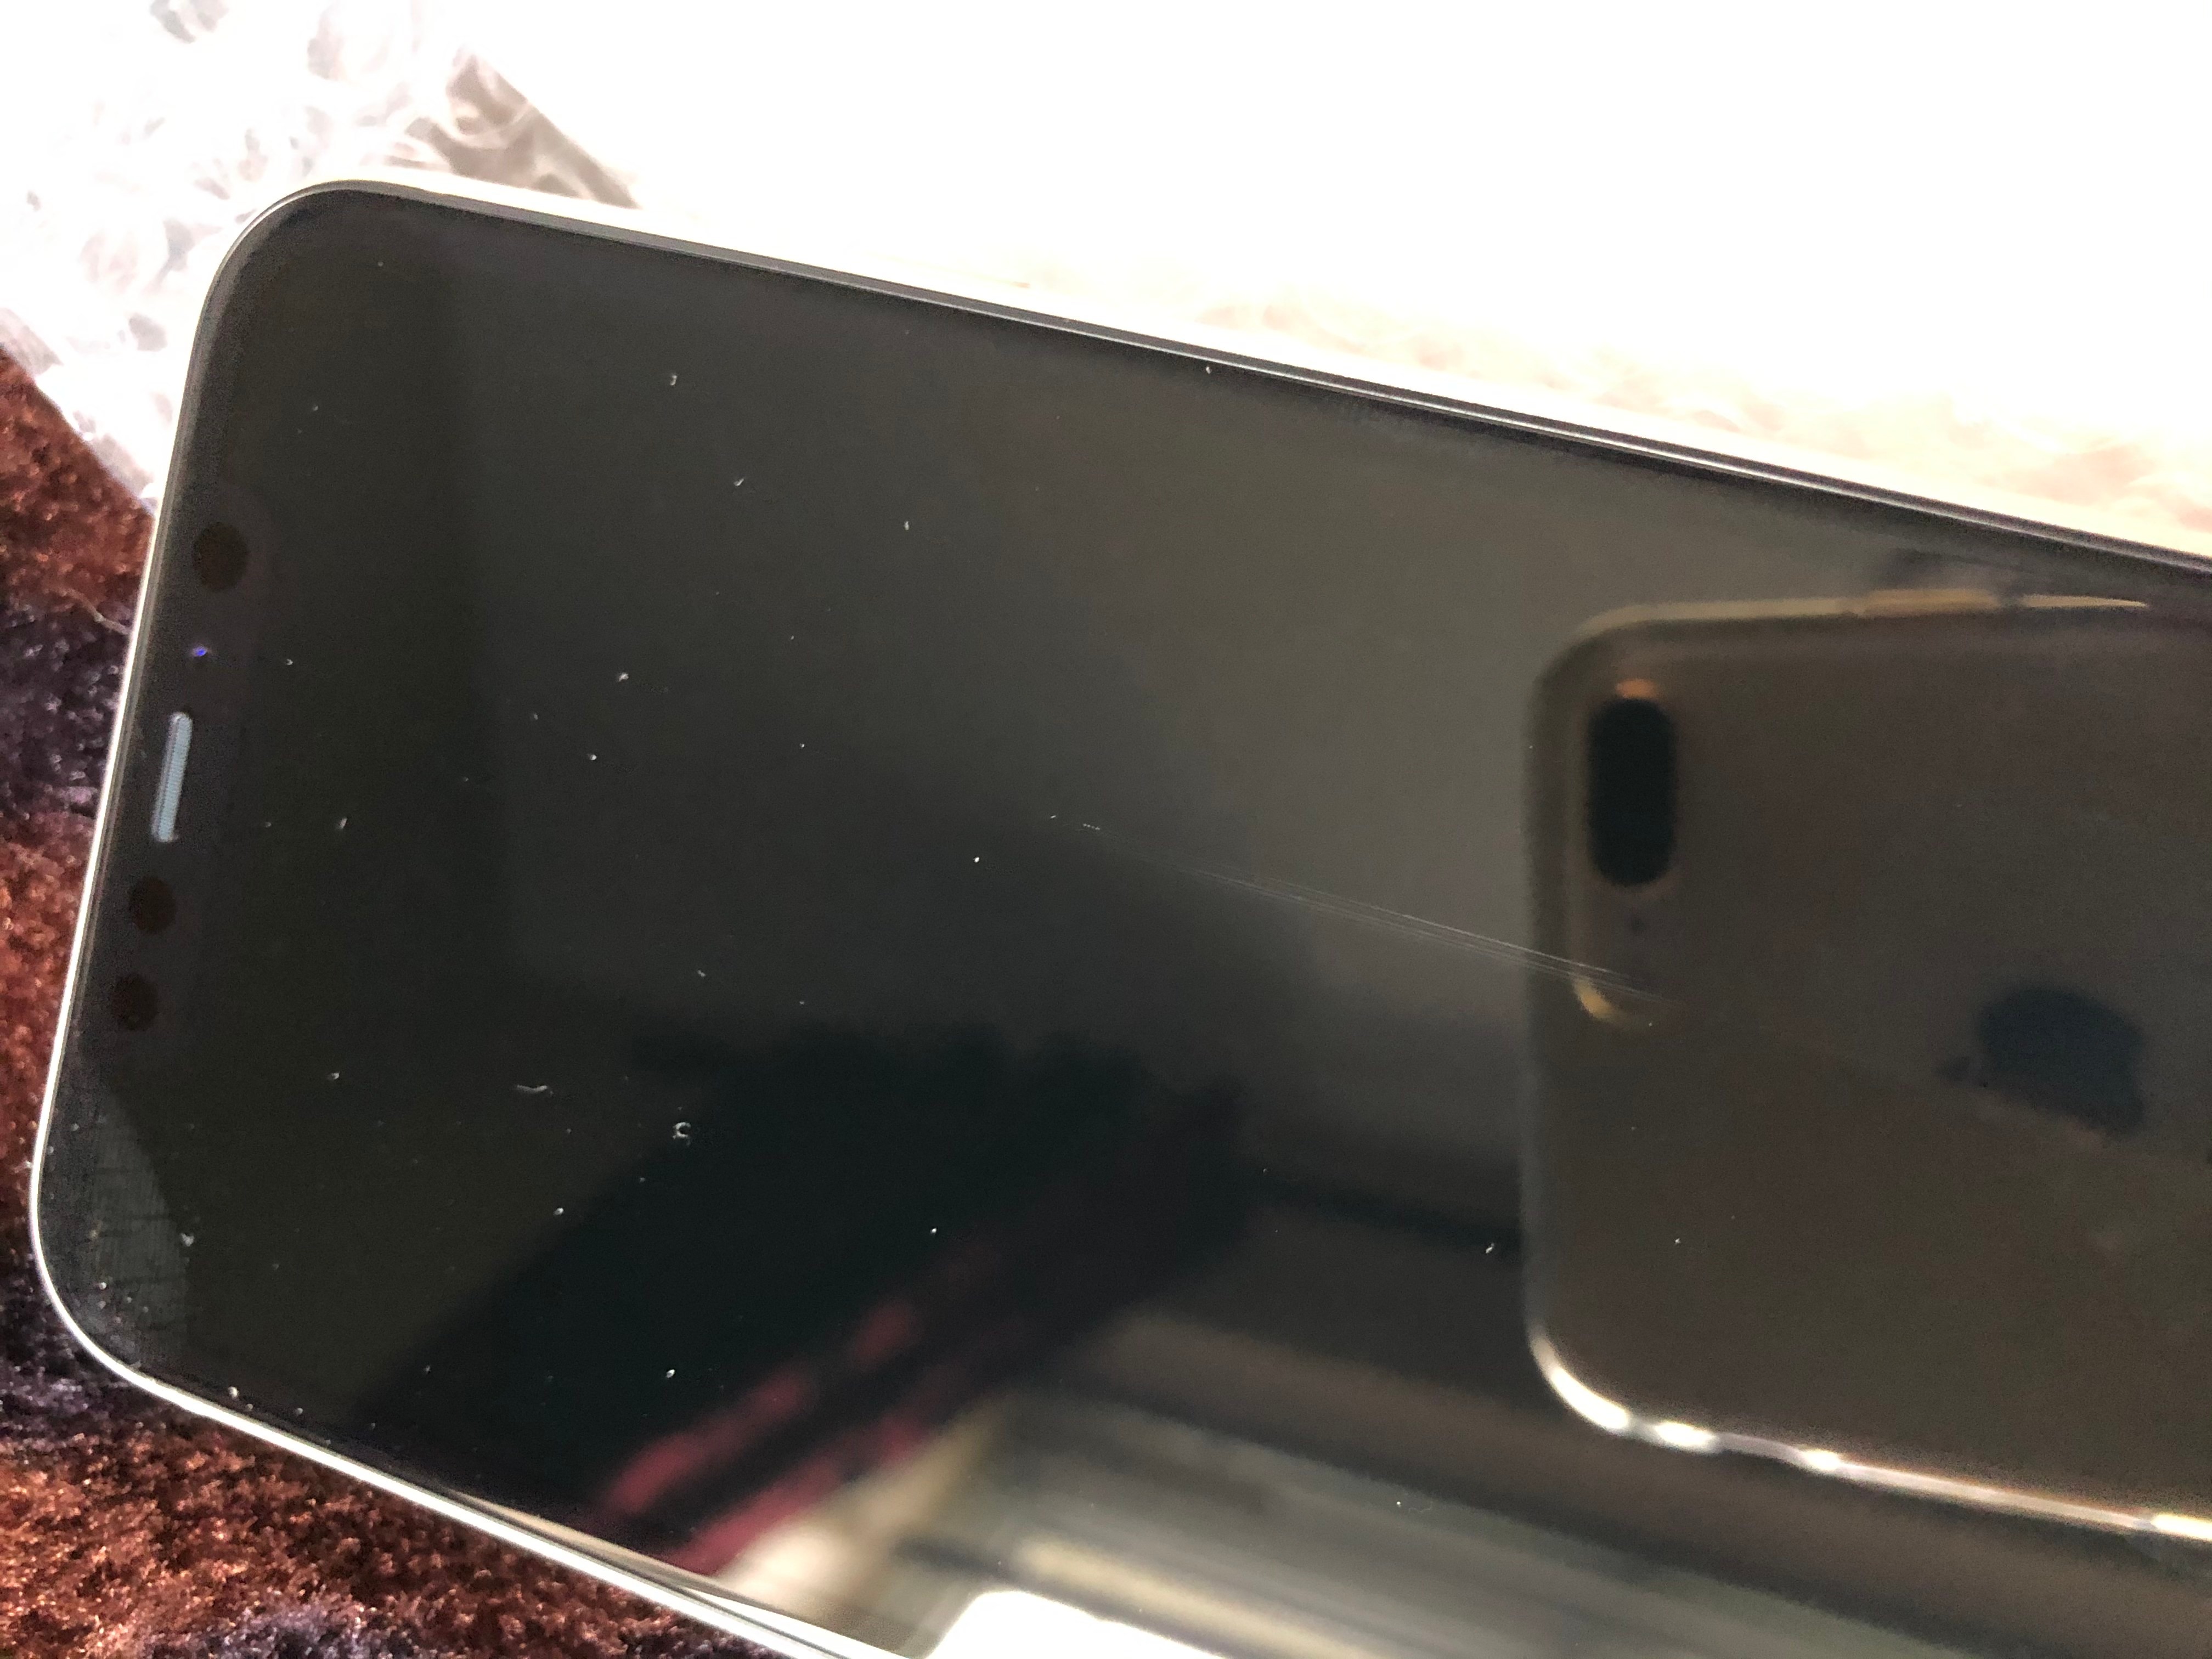 Scratched brand new iphone 14 proMax! - Apple Community